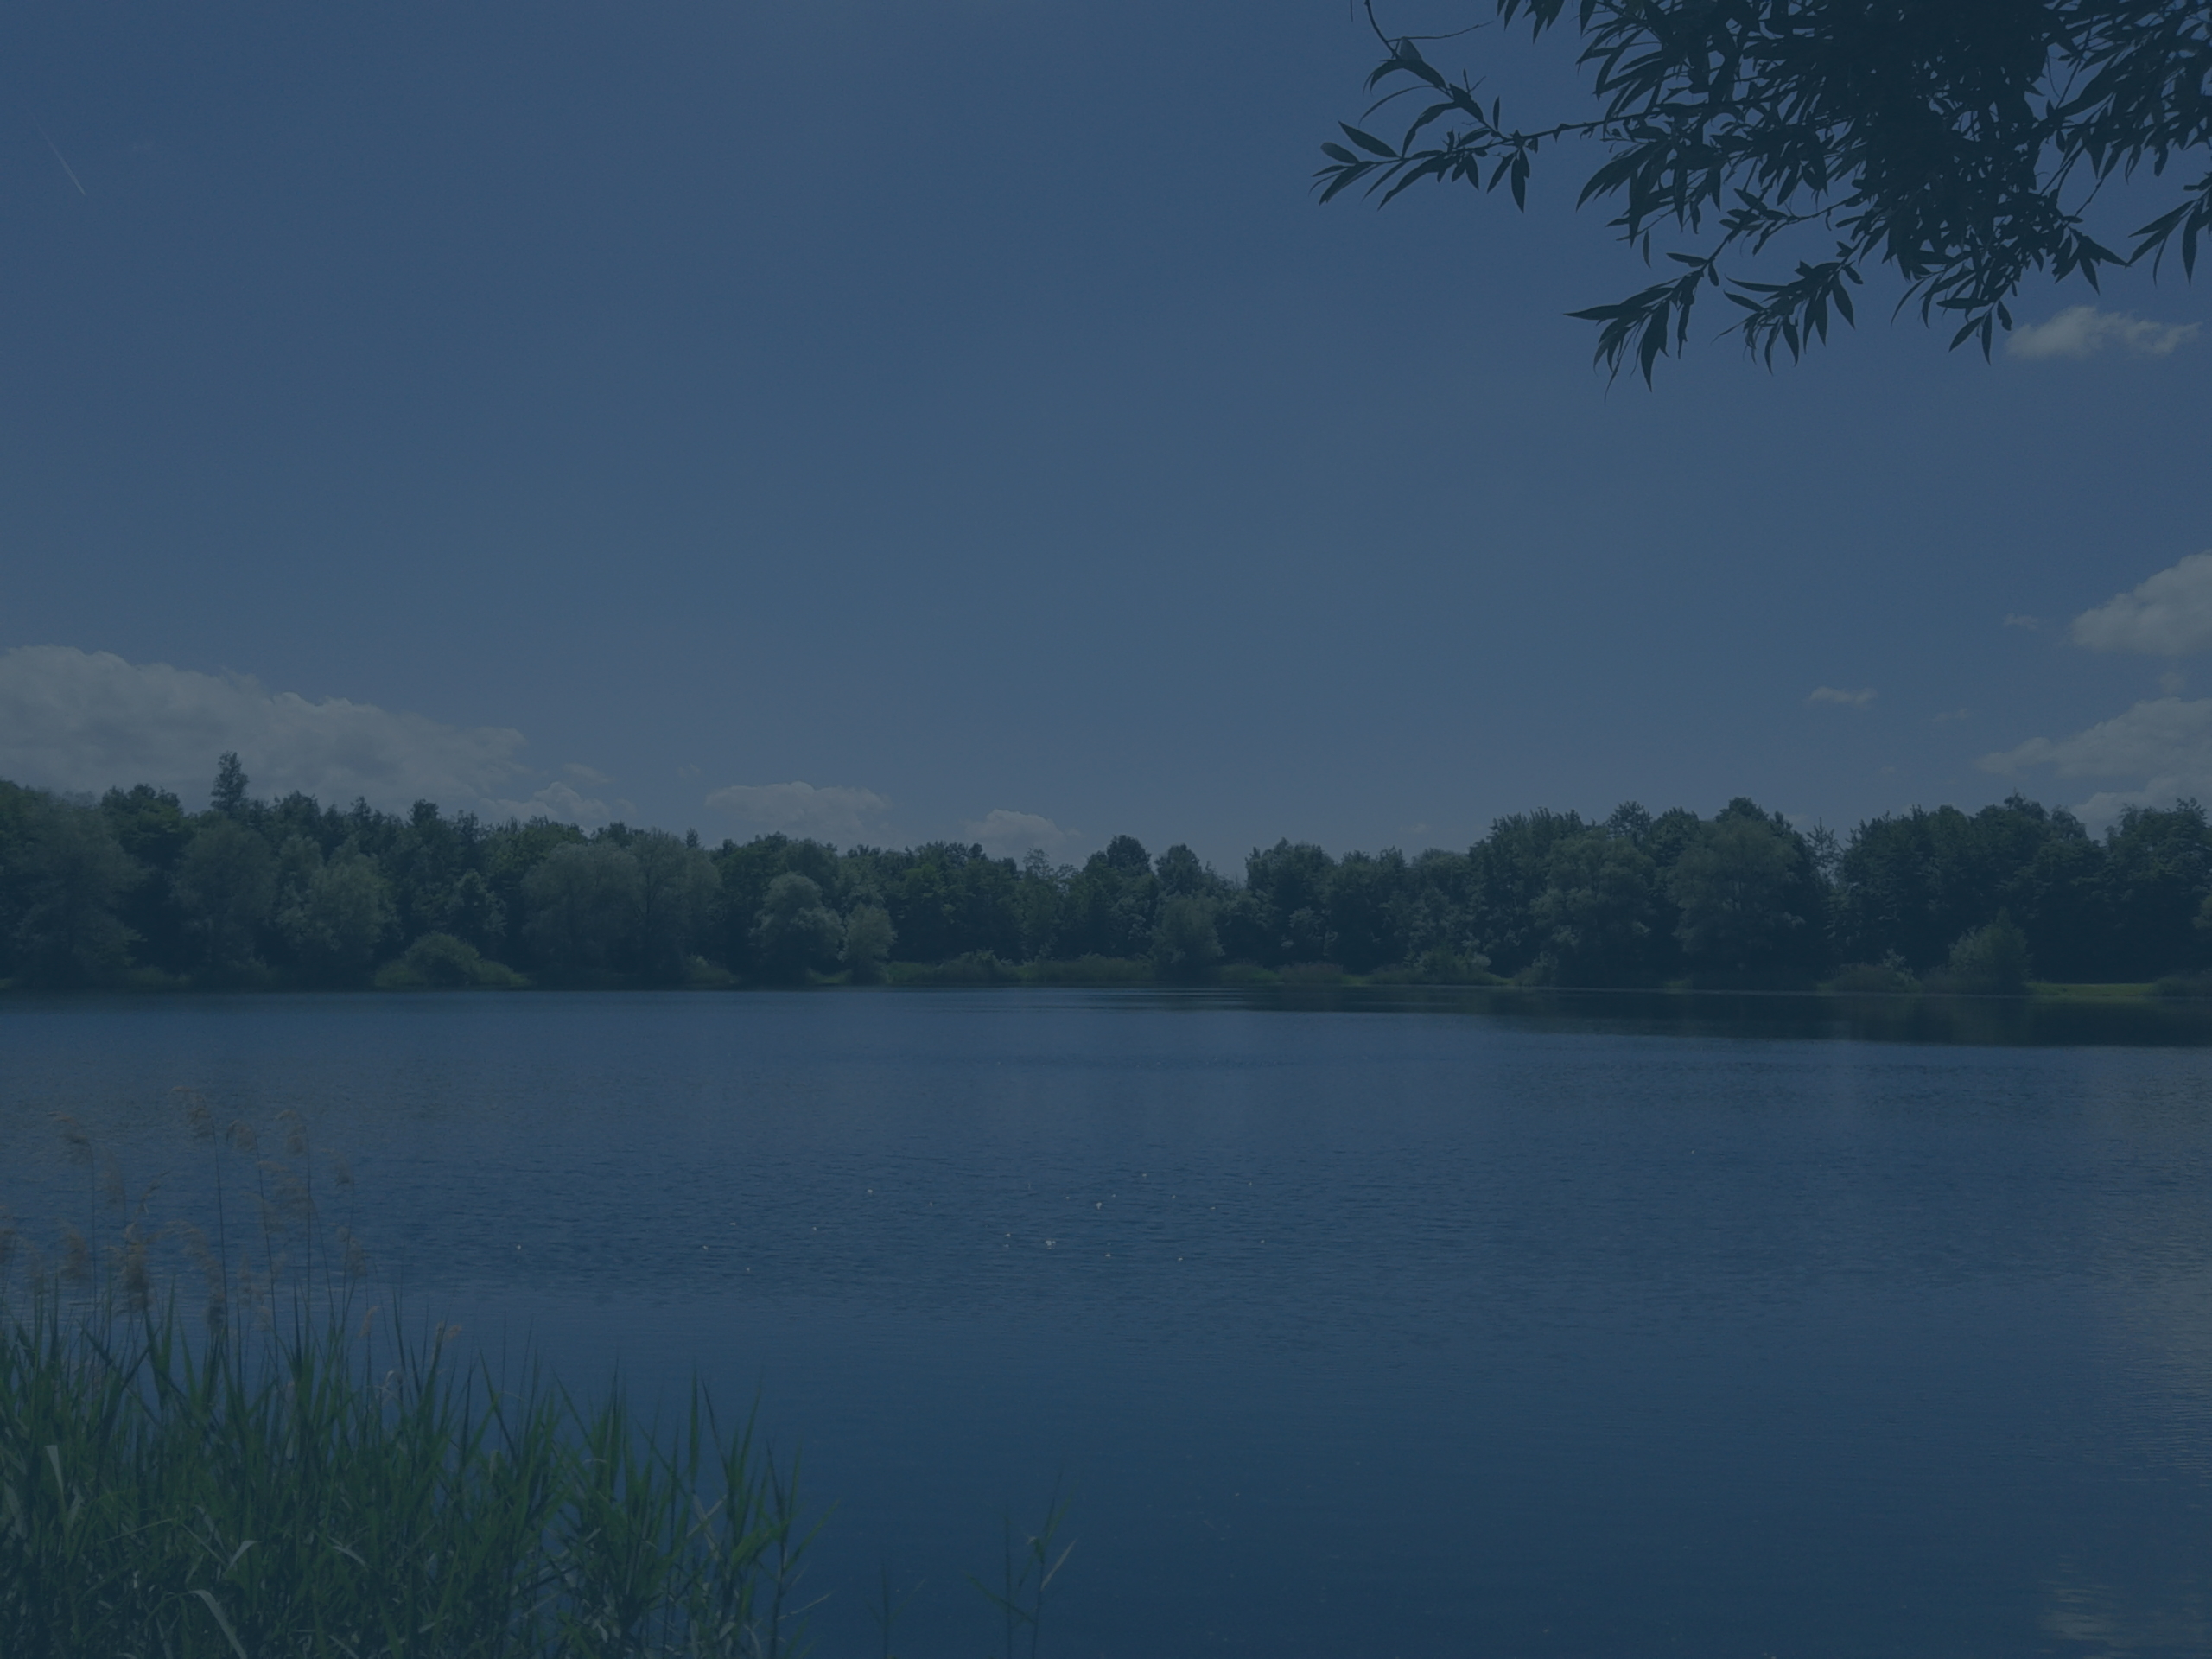 An image of a lake near Karlsruhe. It is a very peacefull place. No trace of humans. In the foreground on the left there is some tall grass. It is a warm summer day with only a few clouds.